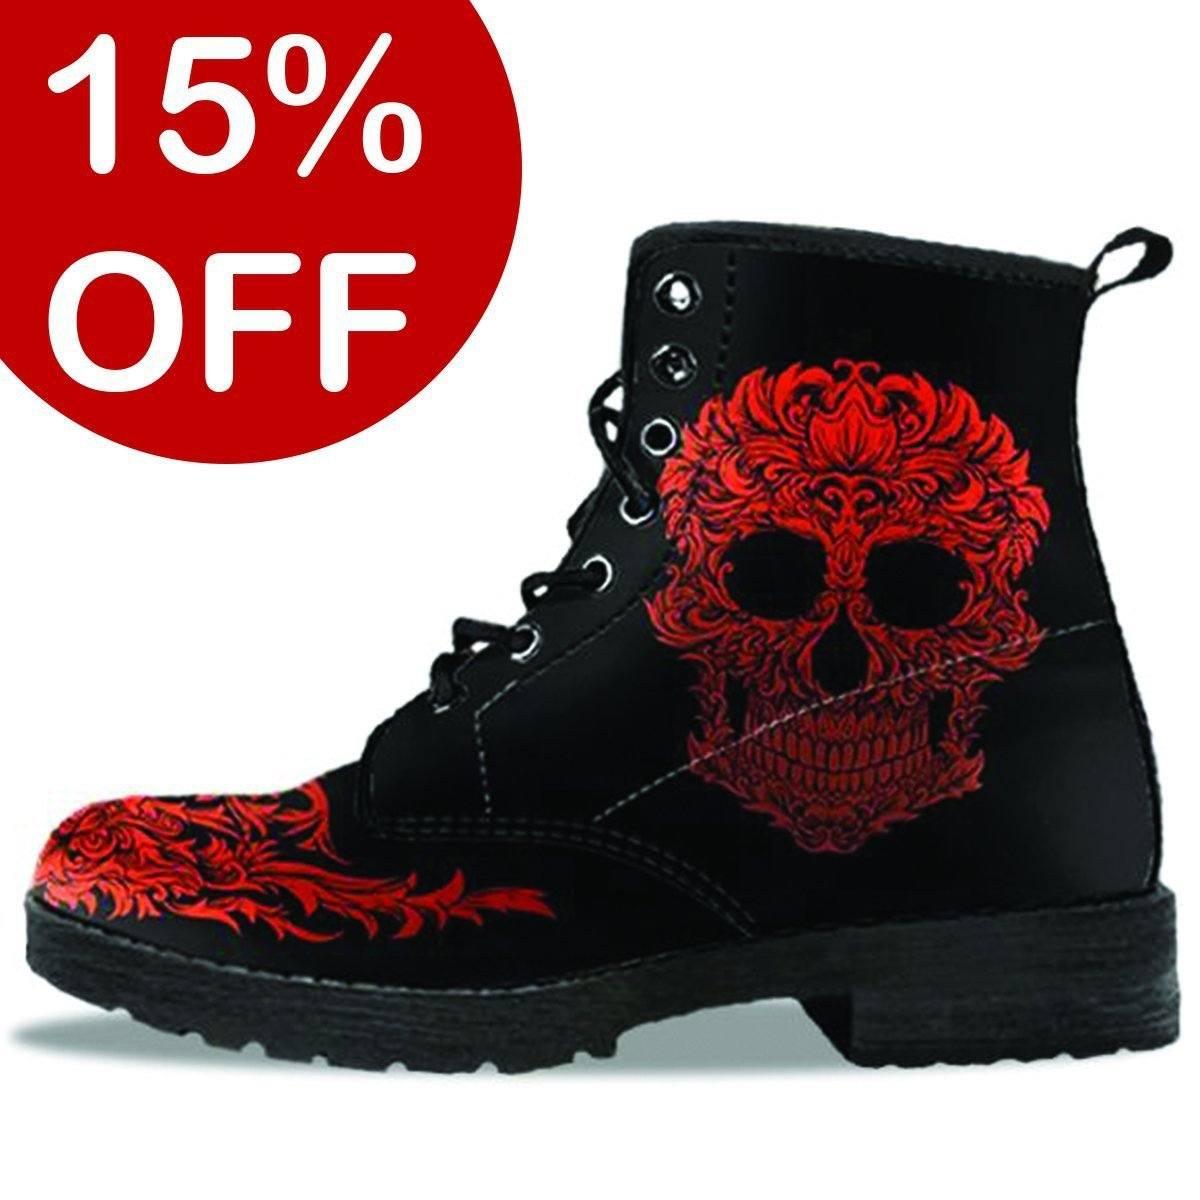 Women's Bloody Skull Boots, Vegan-Friendly Leather, Black/Red - American Legend Rider